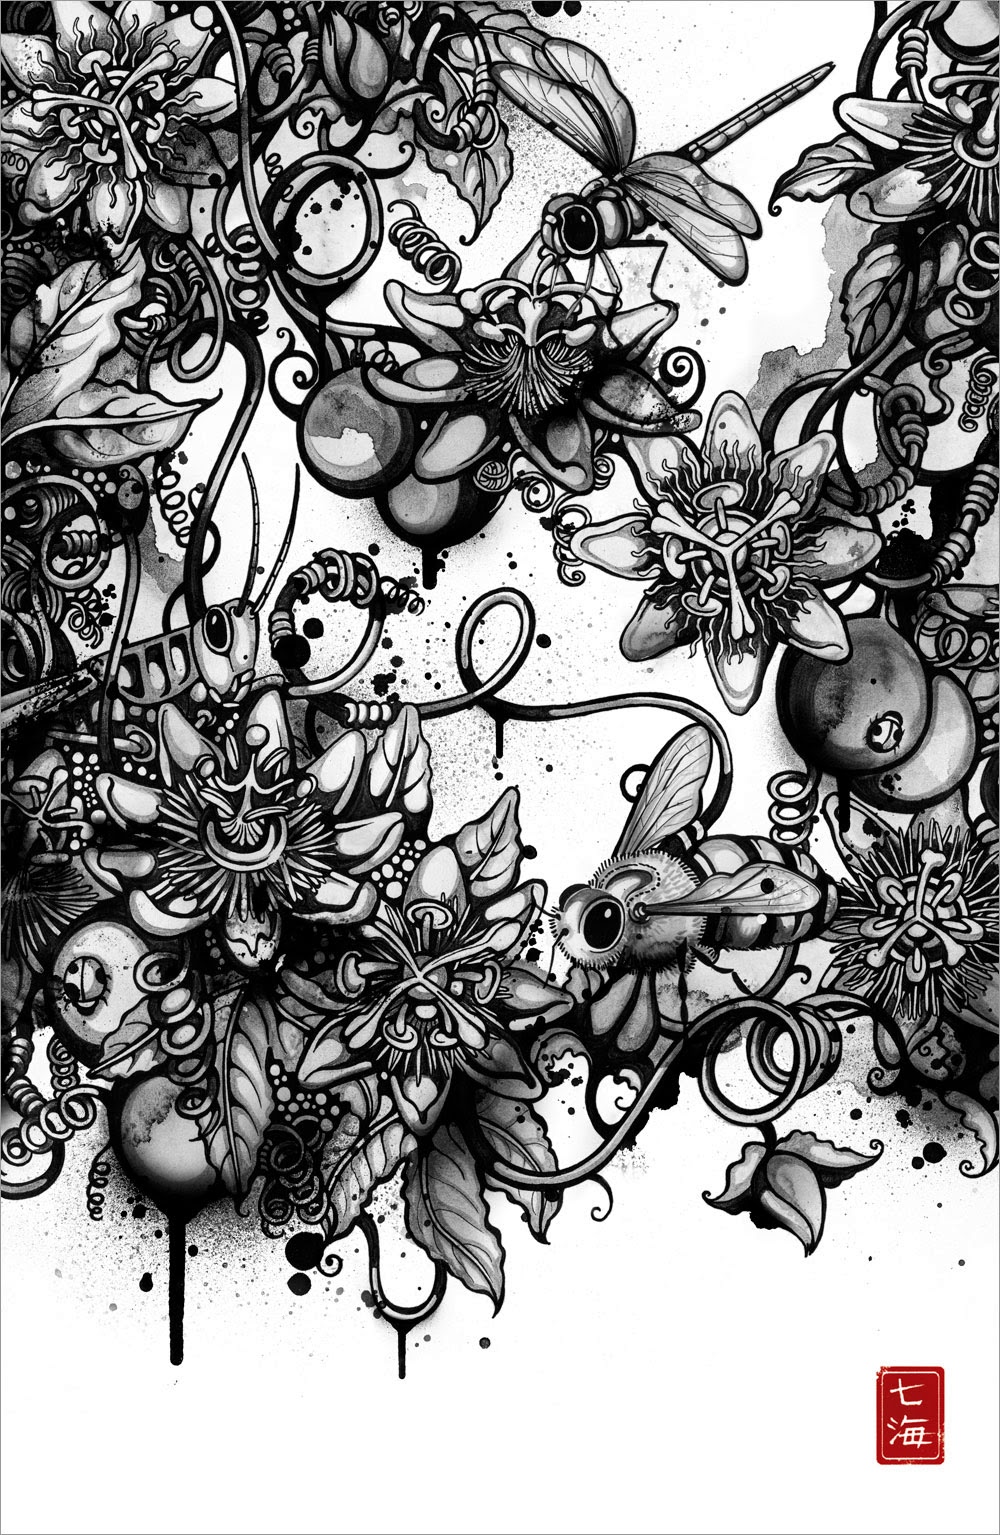 07-Inksects-Nanami-Cowdroy-Splashes-of-Ink-Drawings-www-designstack-co